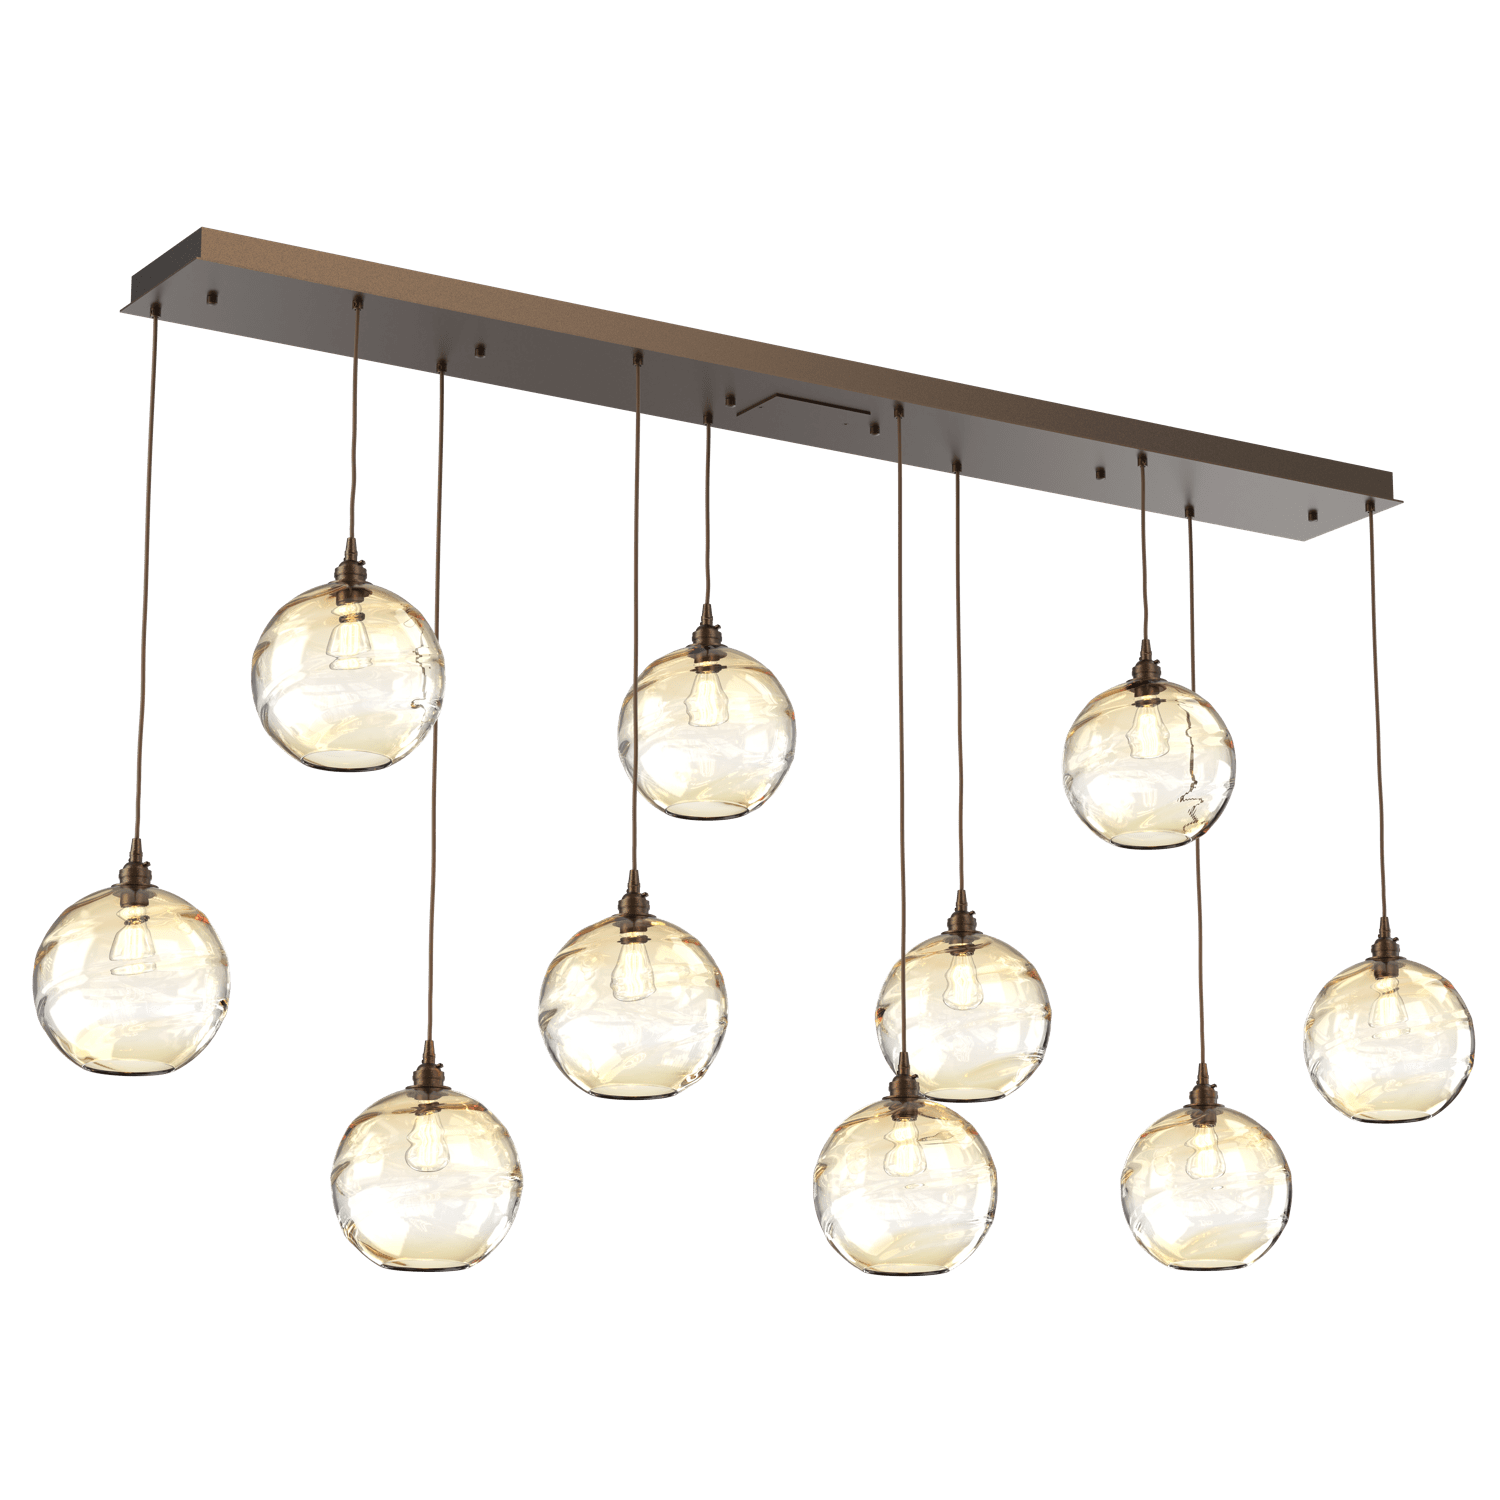 PLB0047-10-FB-OA-Hammerton-Studio-Optic-Blown-Glass-Terra-10-light-linear-pendant-chandelier-with-flat-bronze-finish-and-optic-amber-blown-glass-shades-and-incandescent-lamping